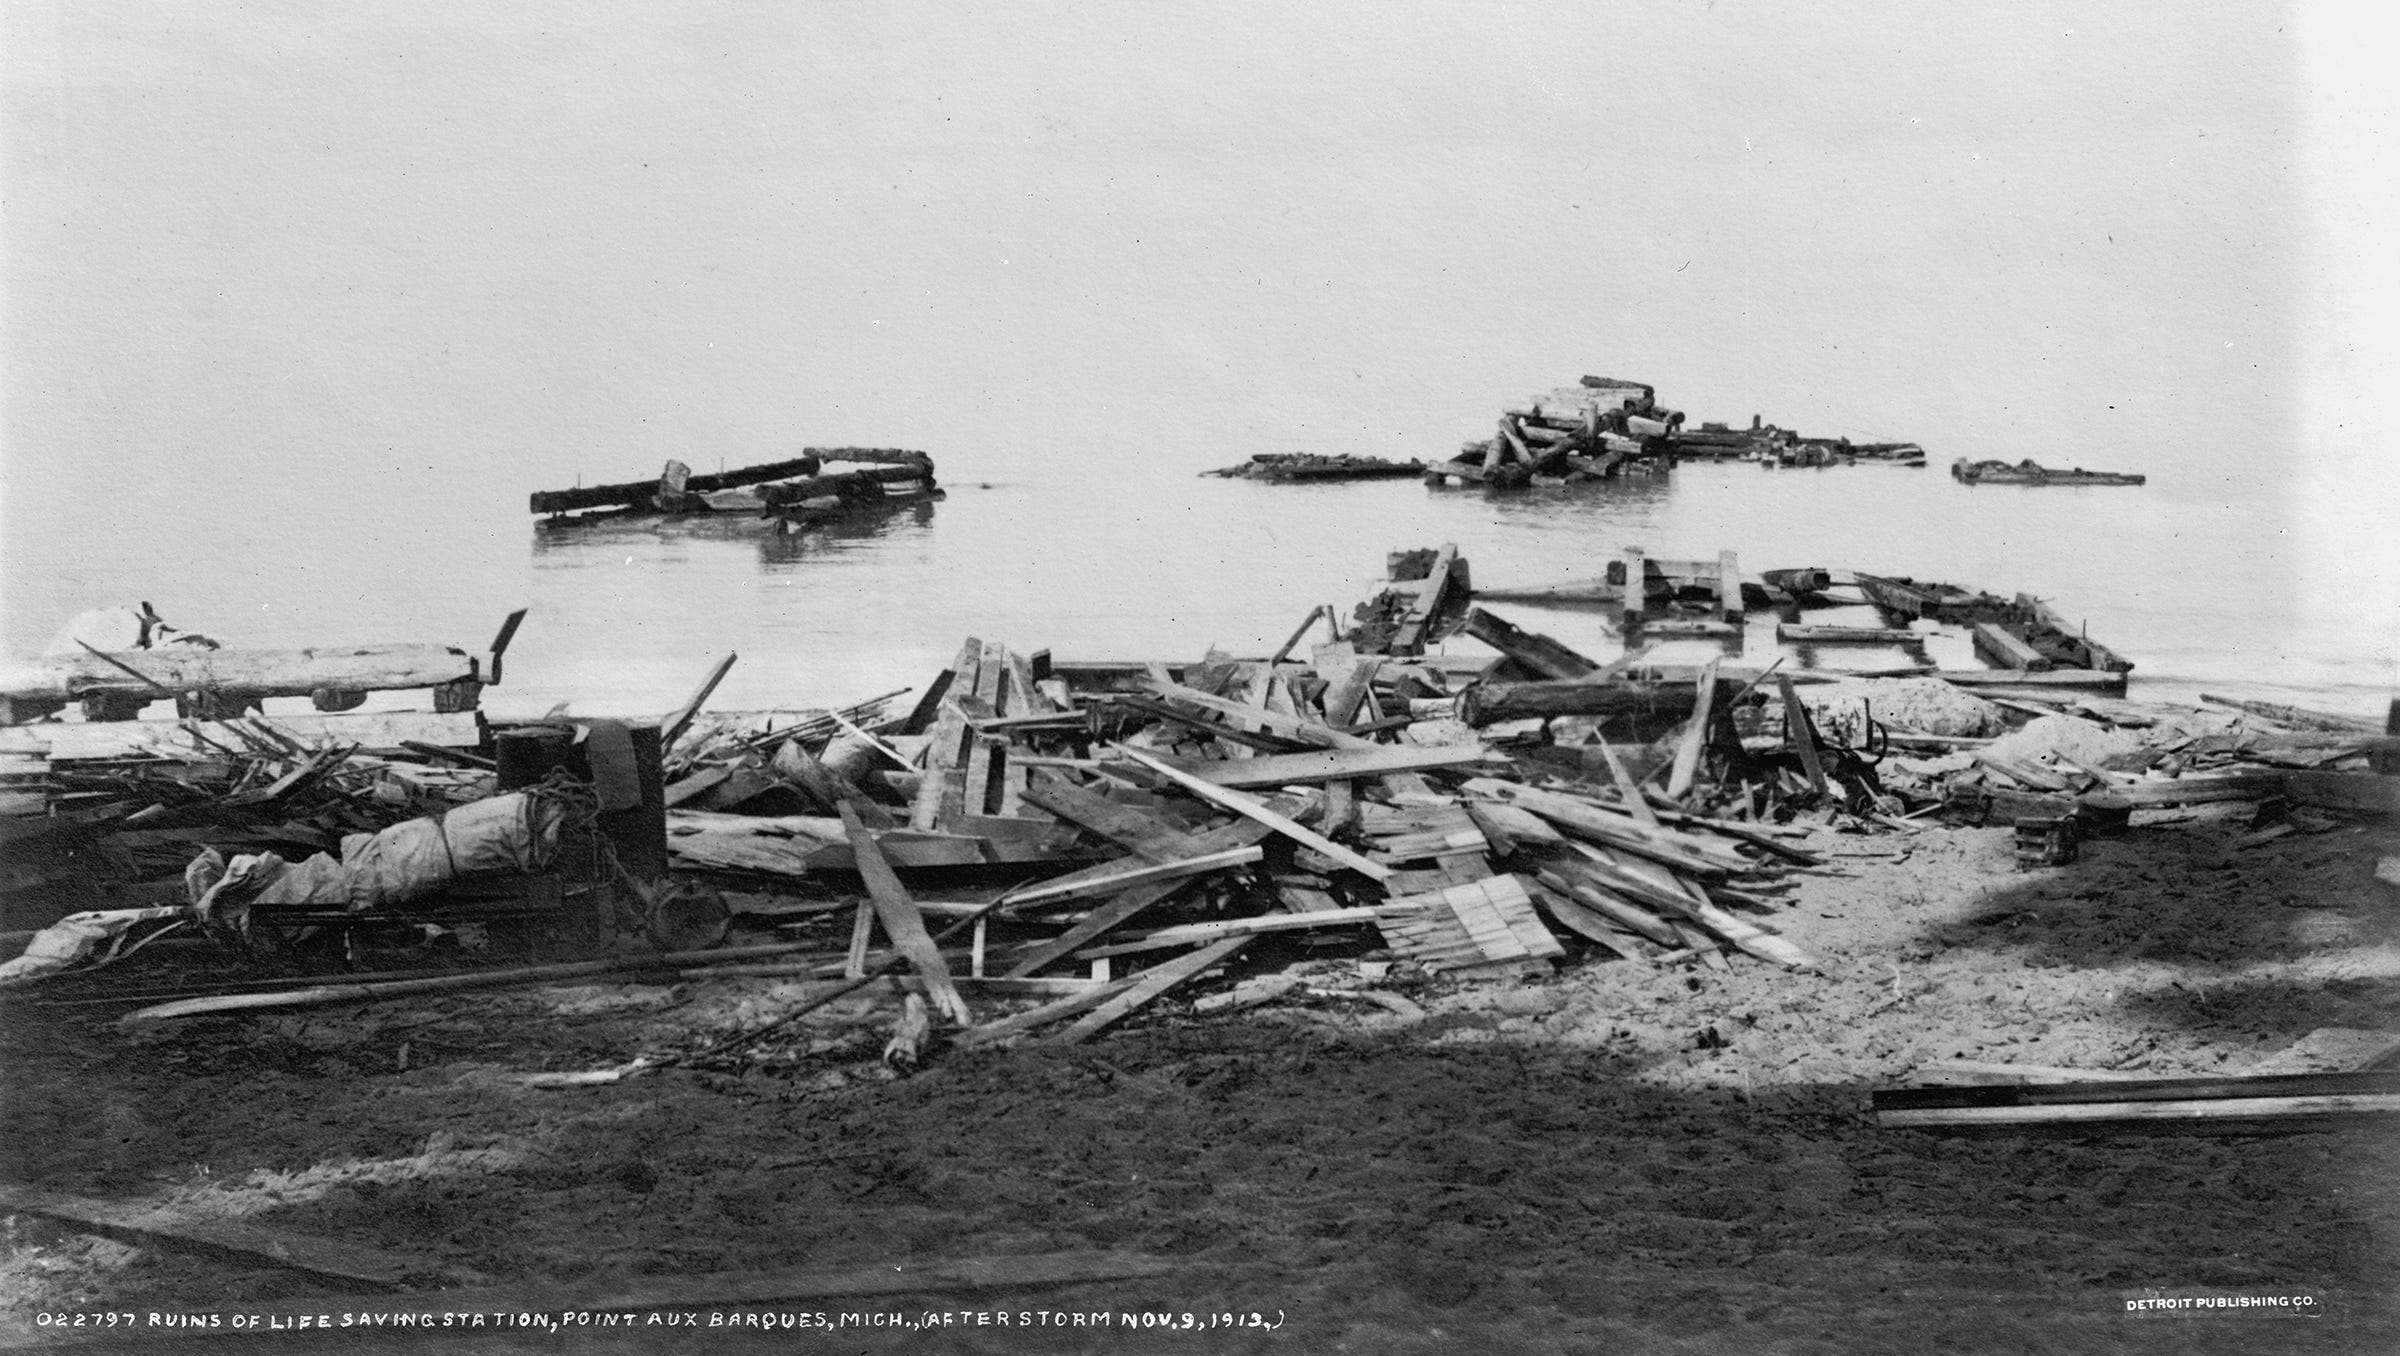 The ruins of a life-saving station in Point aux Barques, at the tip of Michigan's thumb, are seen after the storm hit on Nov. 9, 1913.